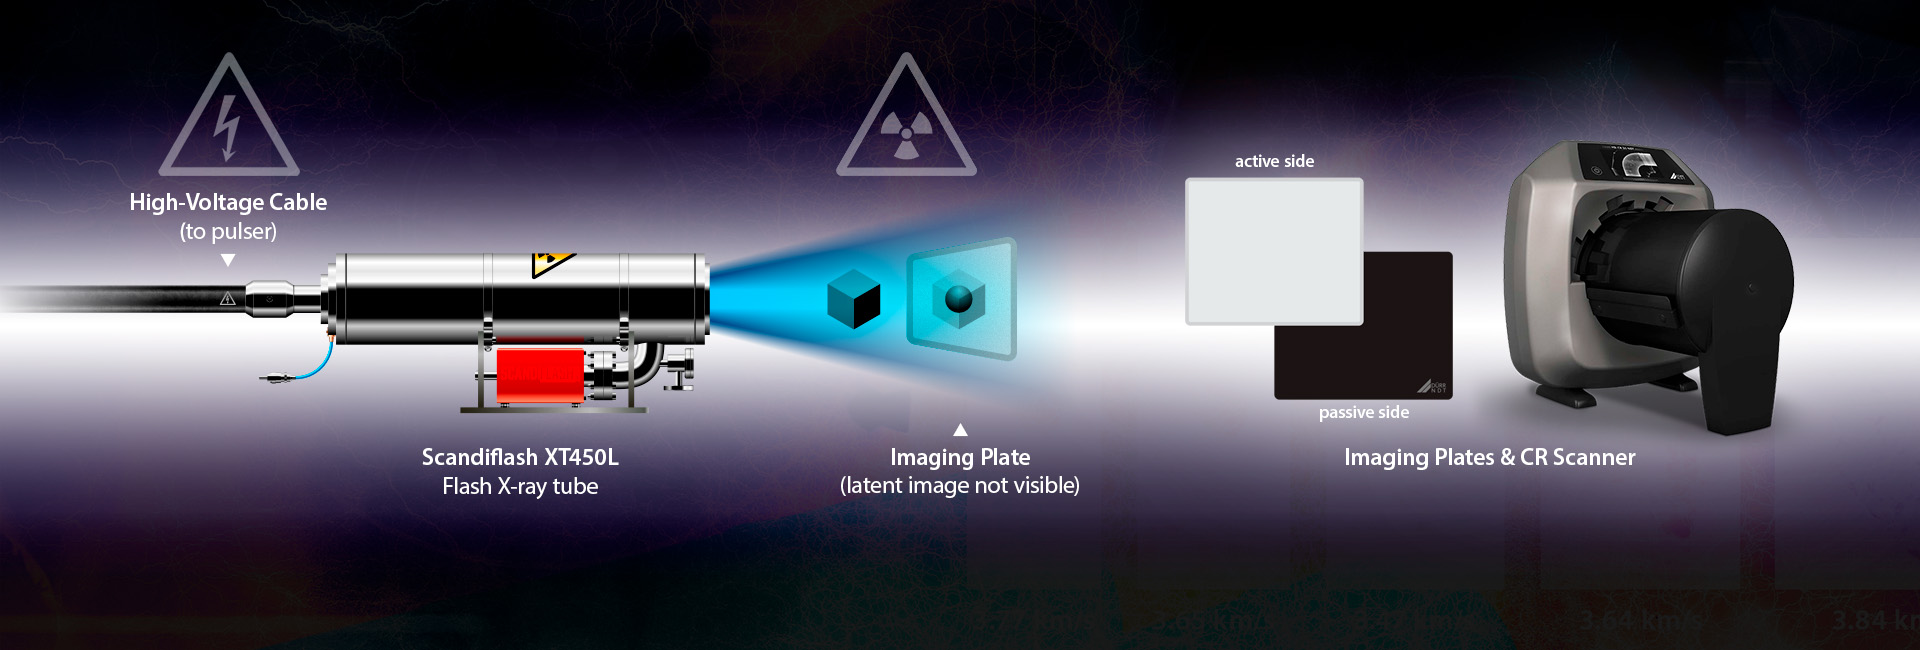 Illustration of Computed Radiography (CR) with Scandiflash XT450L Flash X-ray tube, image plates and CR scanner by Hadland Imaging.